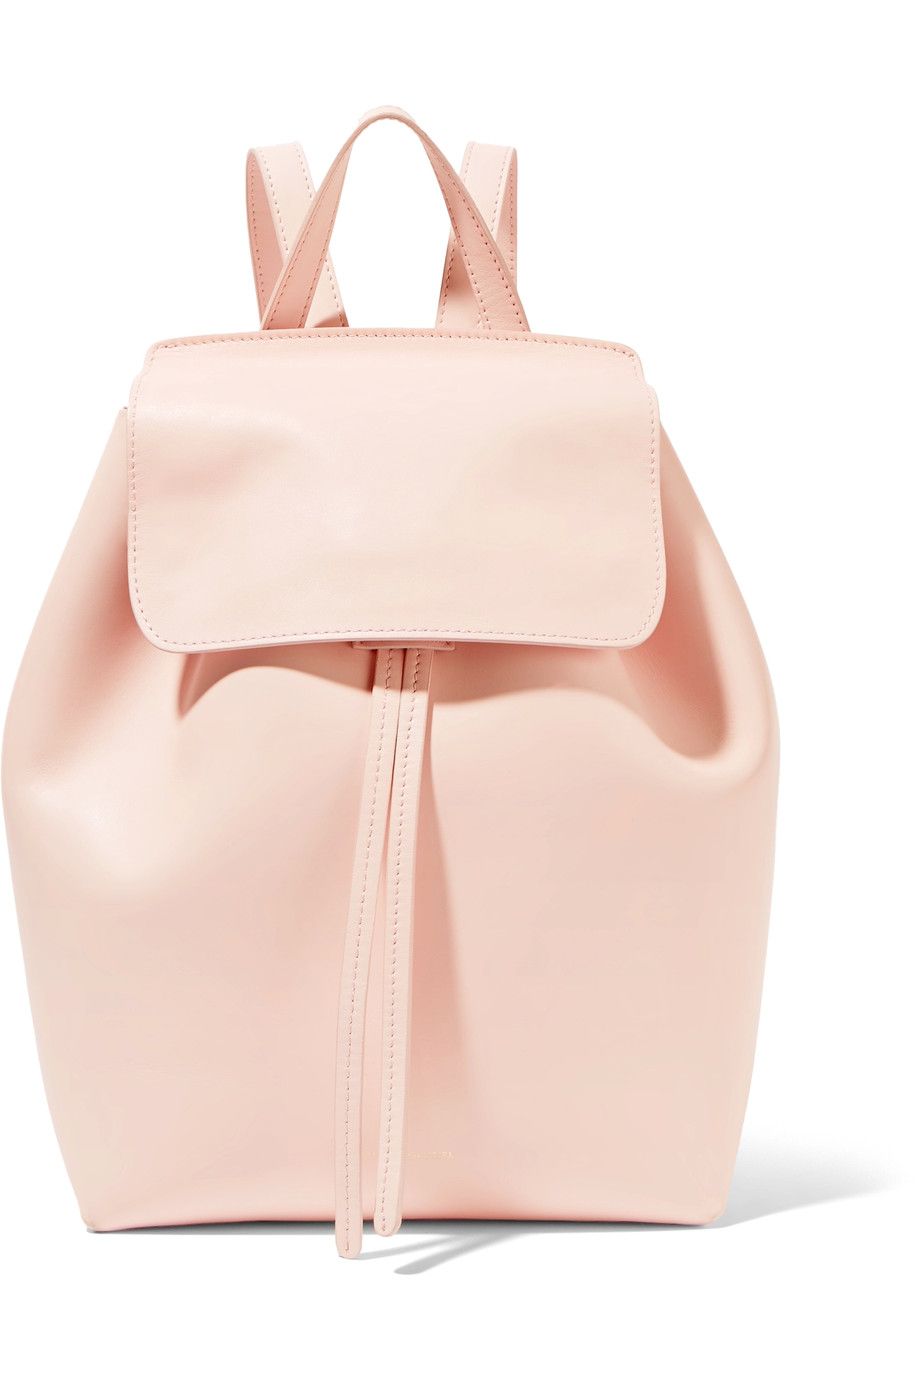 is this 2017’s version of the bucket bag?